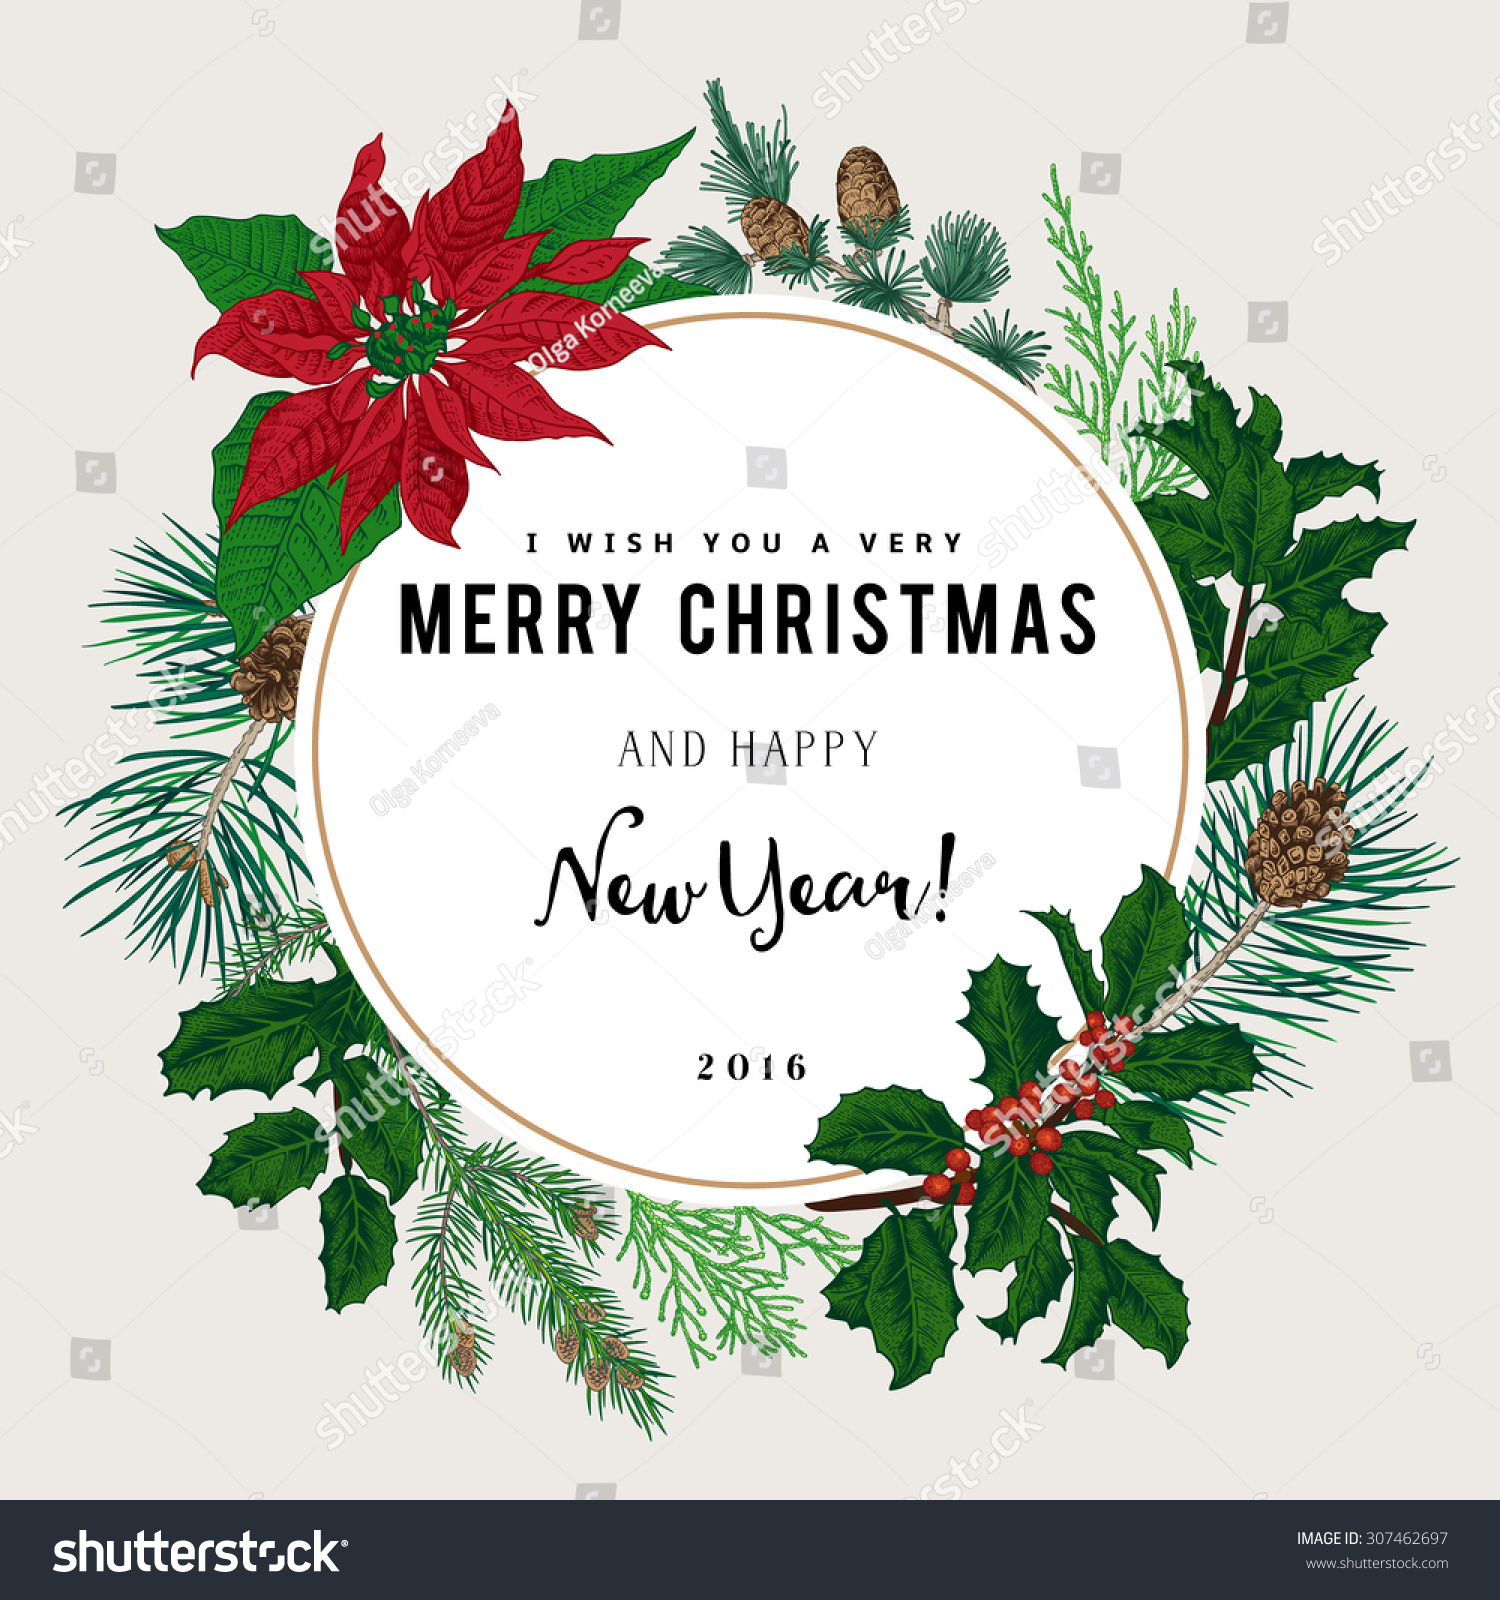 Vintage Vector Card. I Wish You A Very Merry Christmas And Happy New